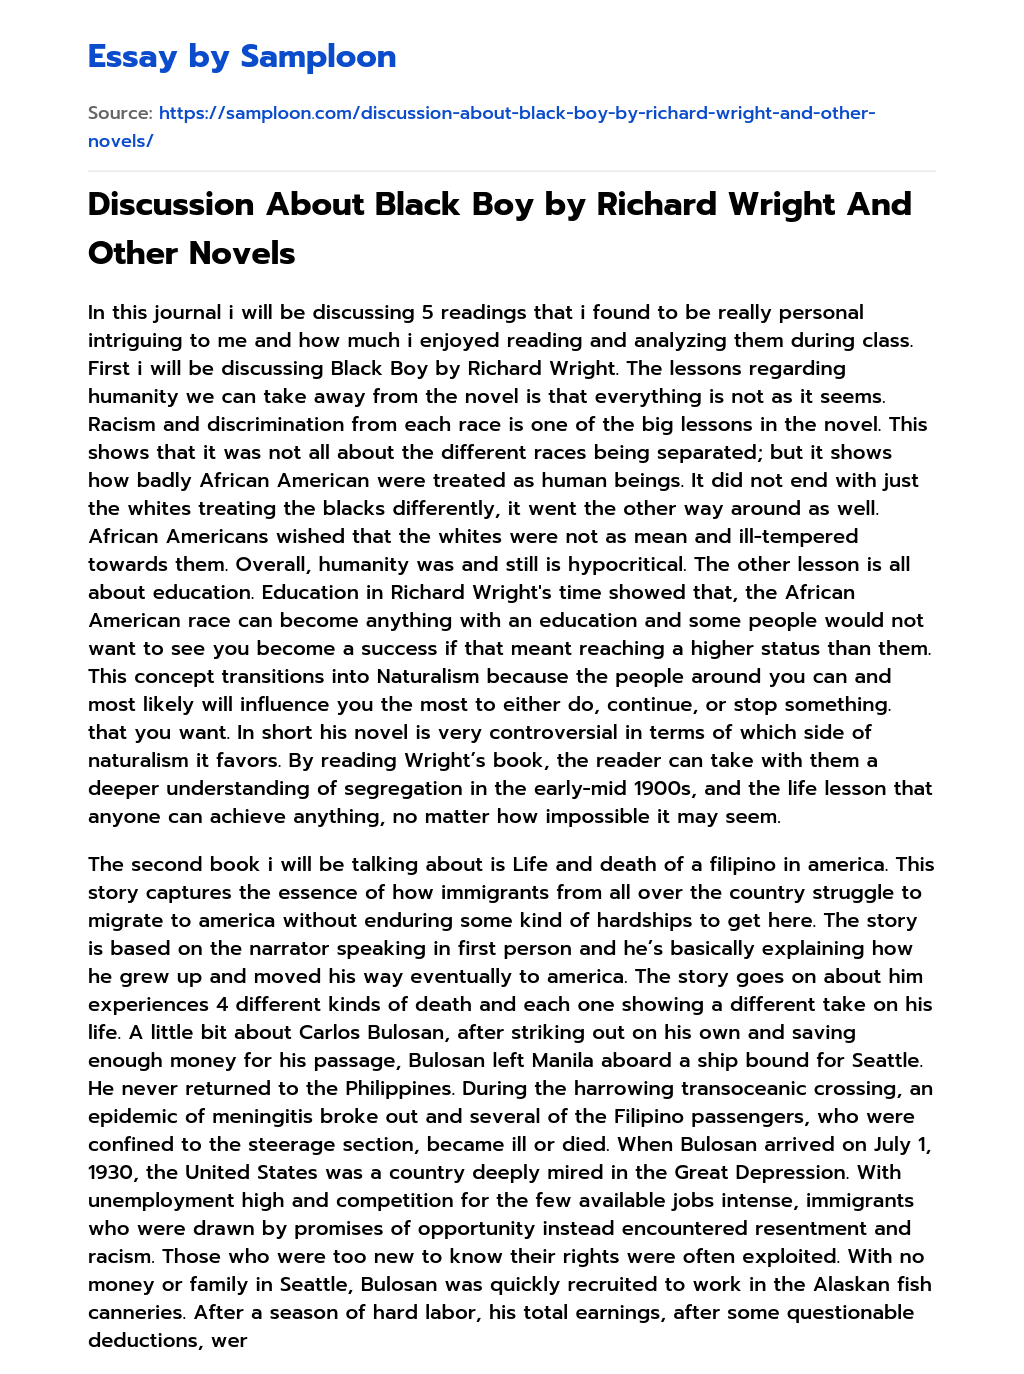 Discussion About Black Boy by Richard Wright And Other Novels essay